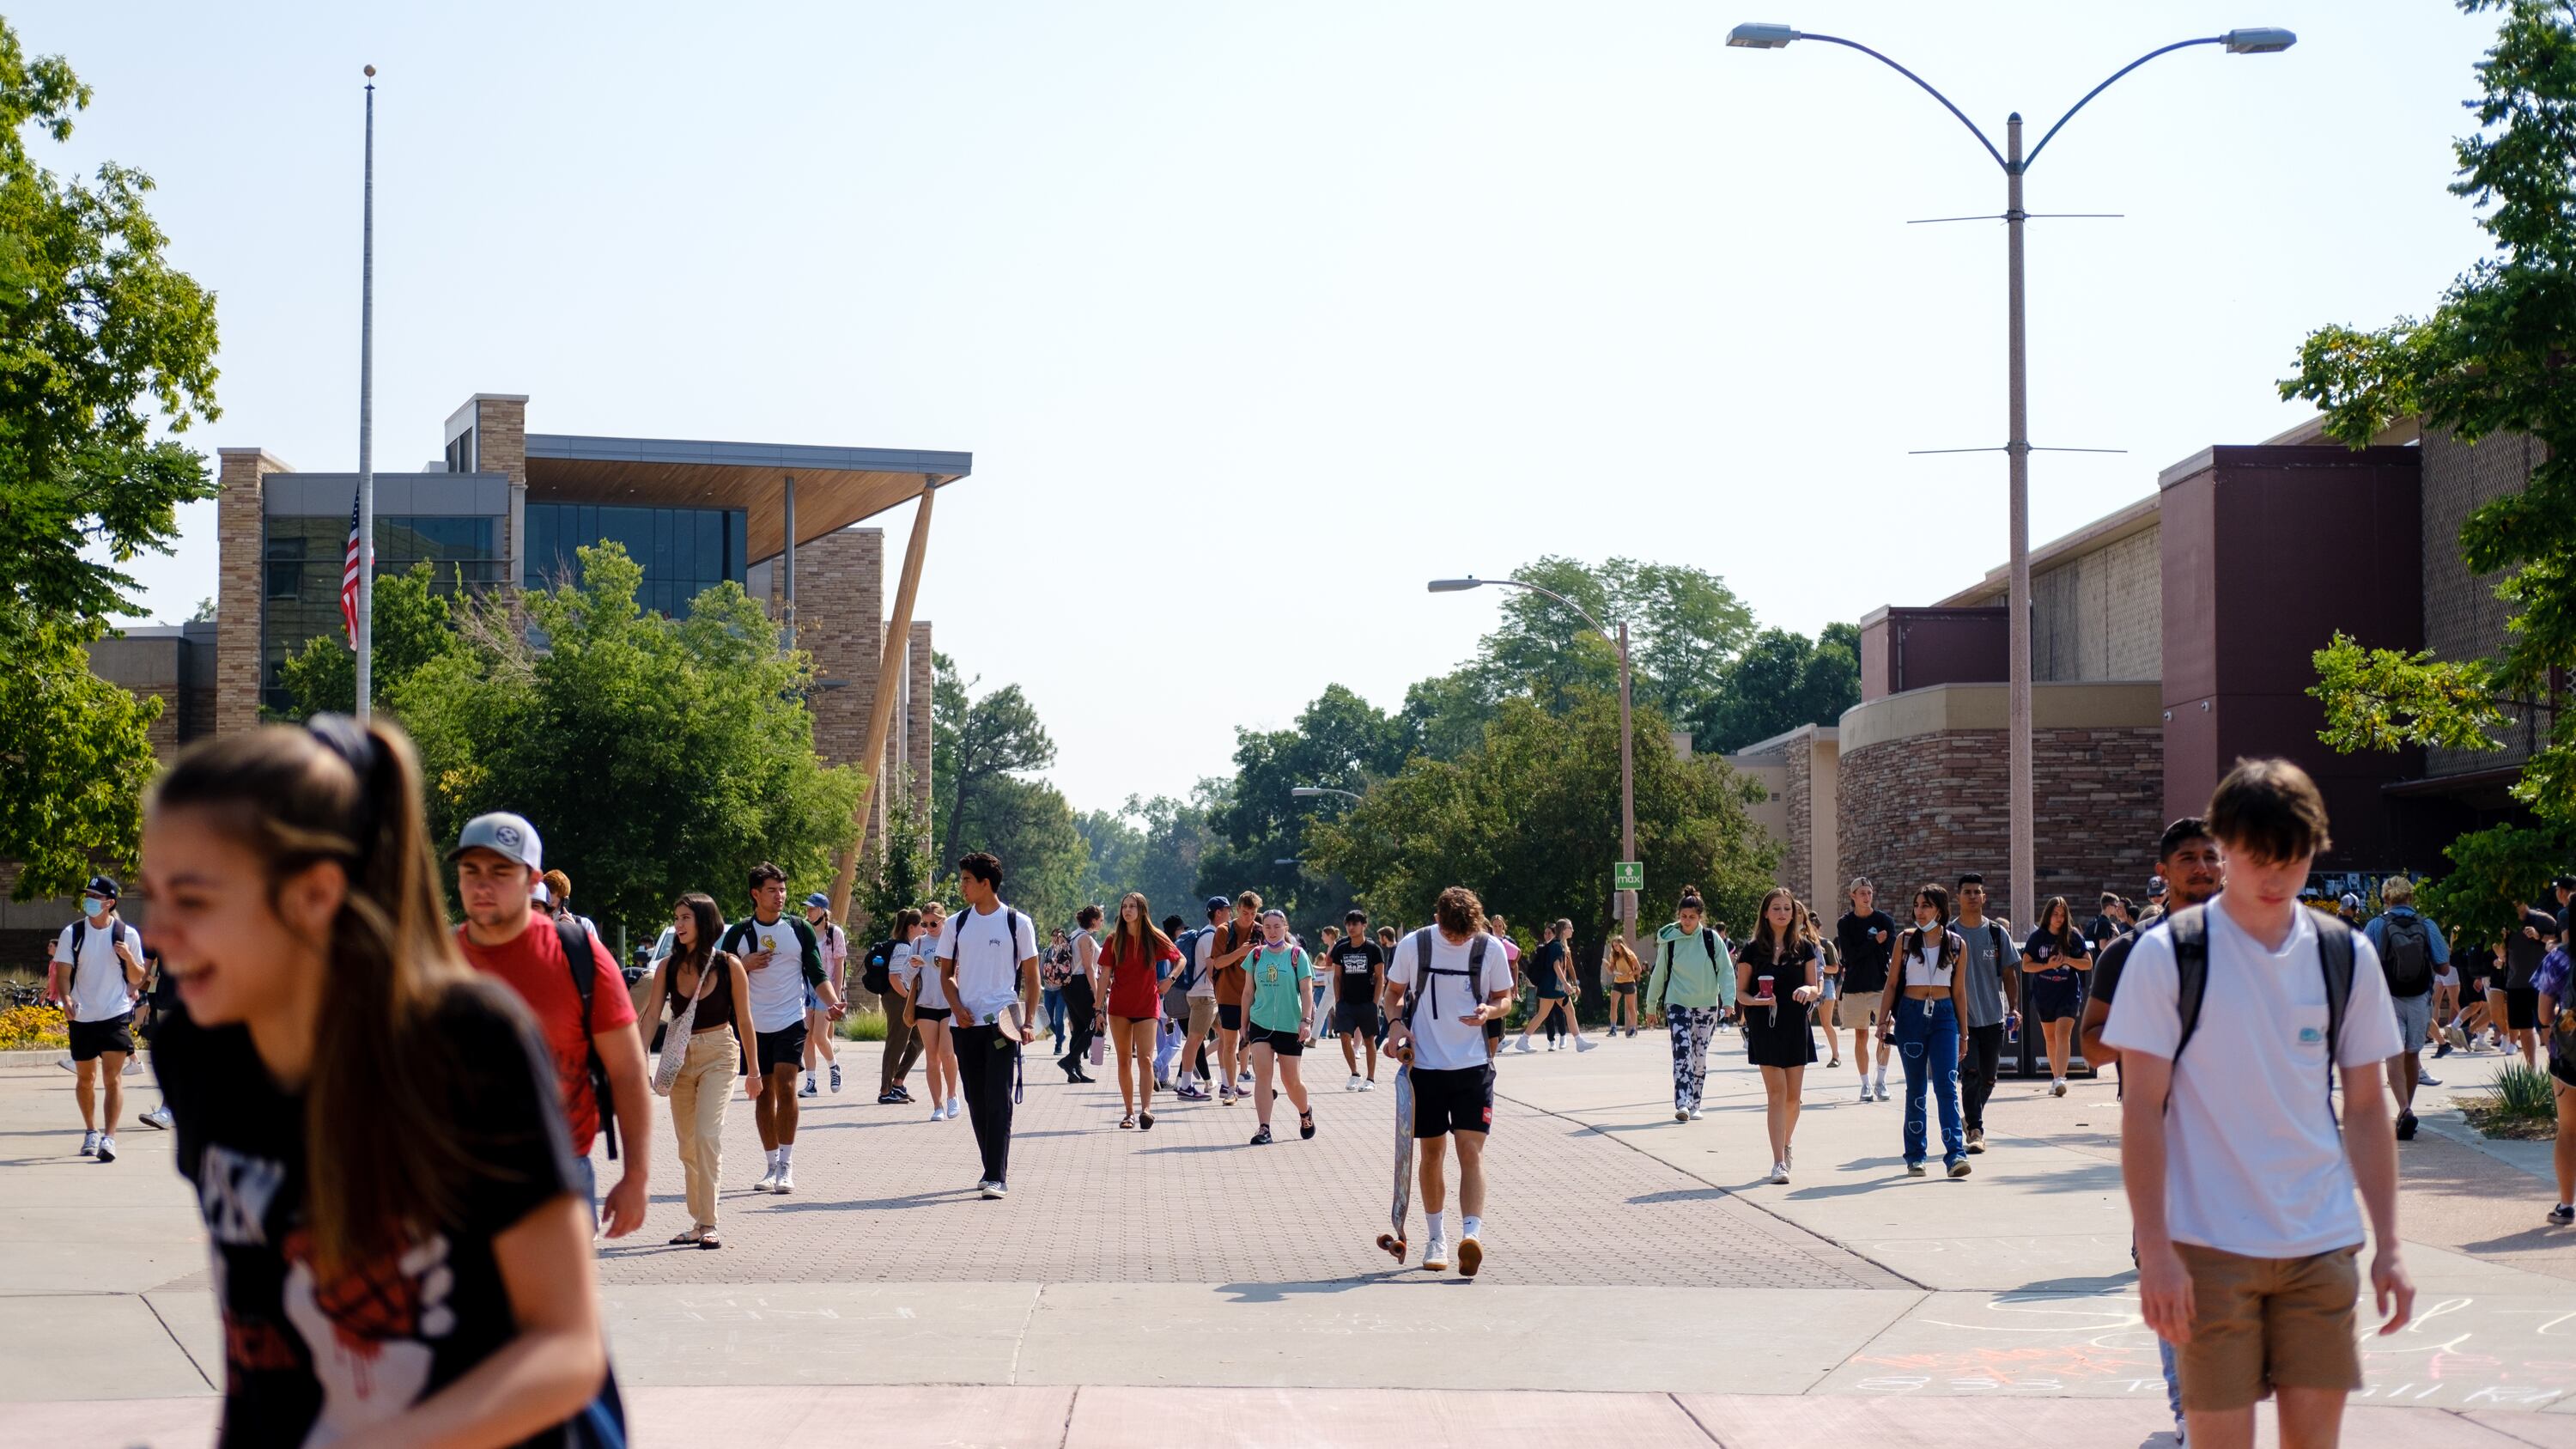 Students walk down a large brick pathway on Colorado State University’s campus. The sun shines on the students in the late summer.